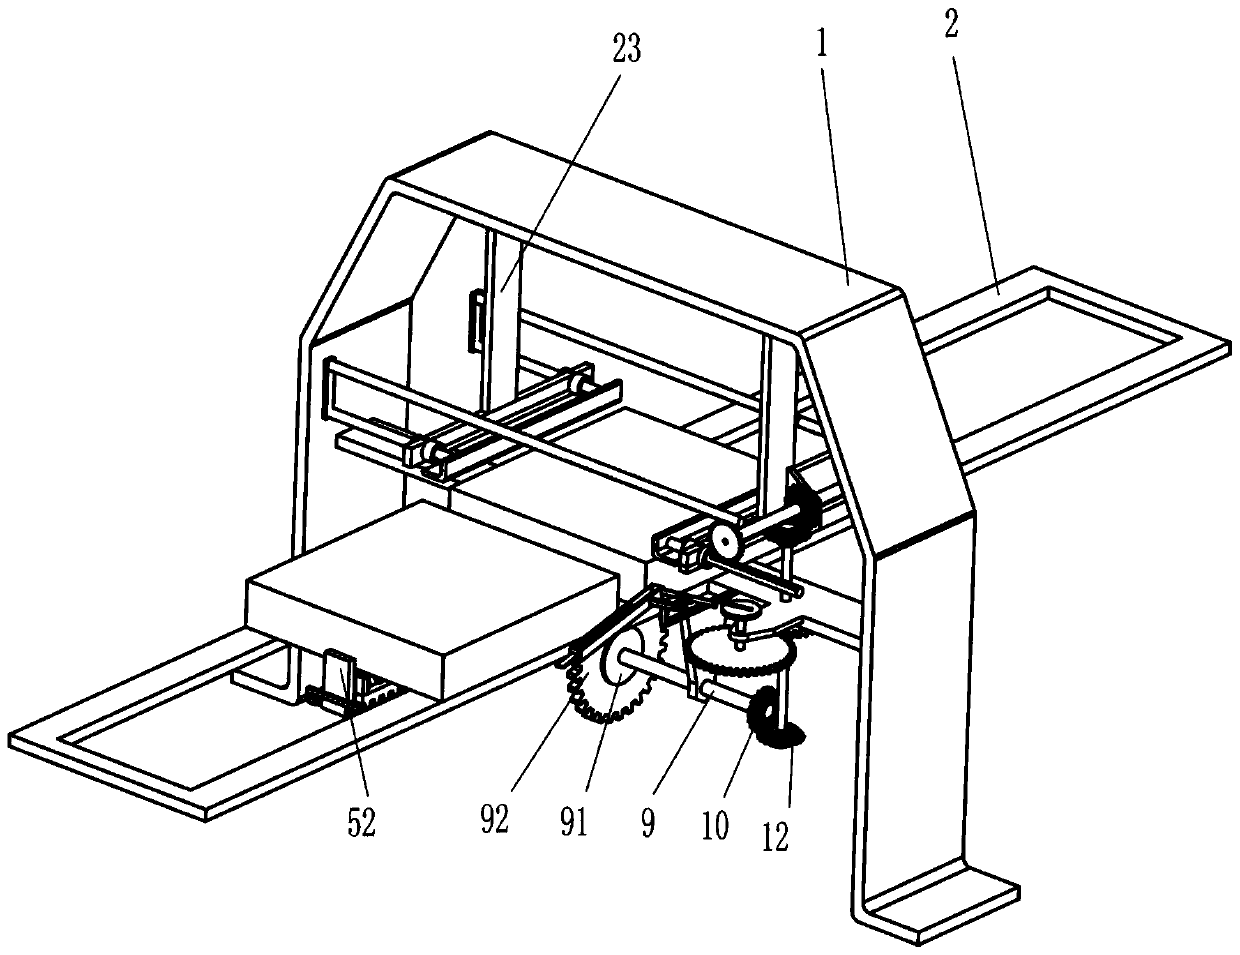 Television packaging edge folding and nailing device